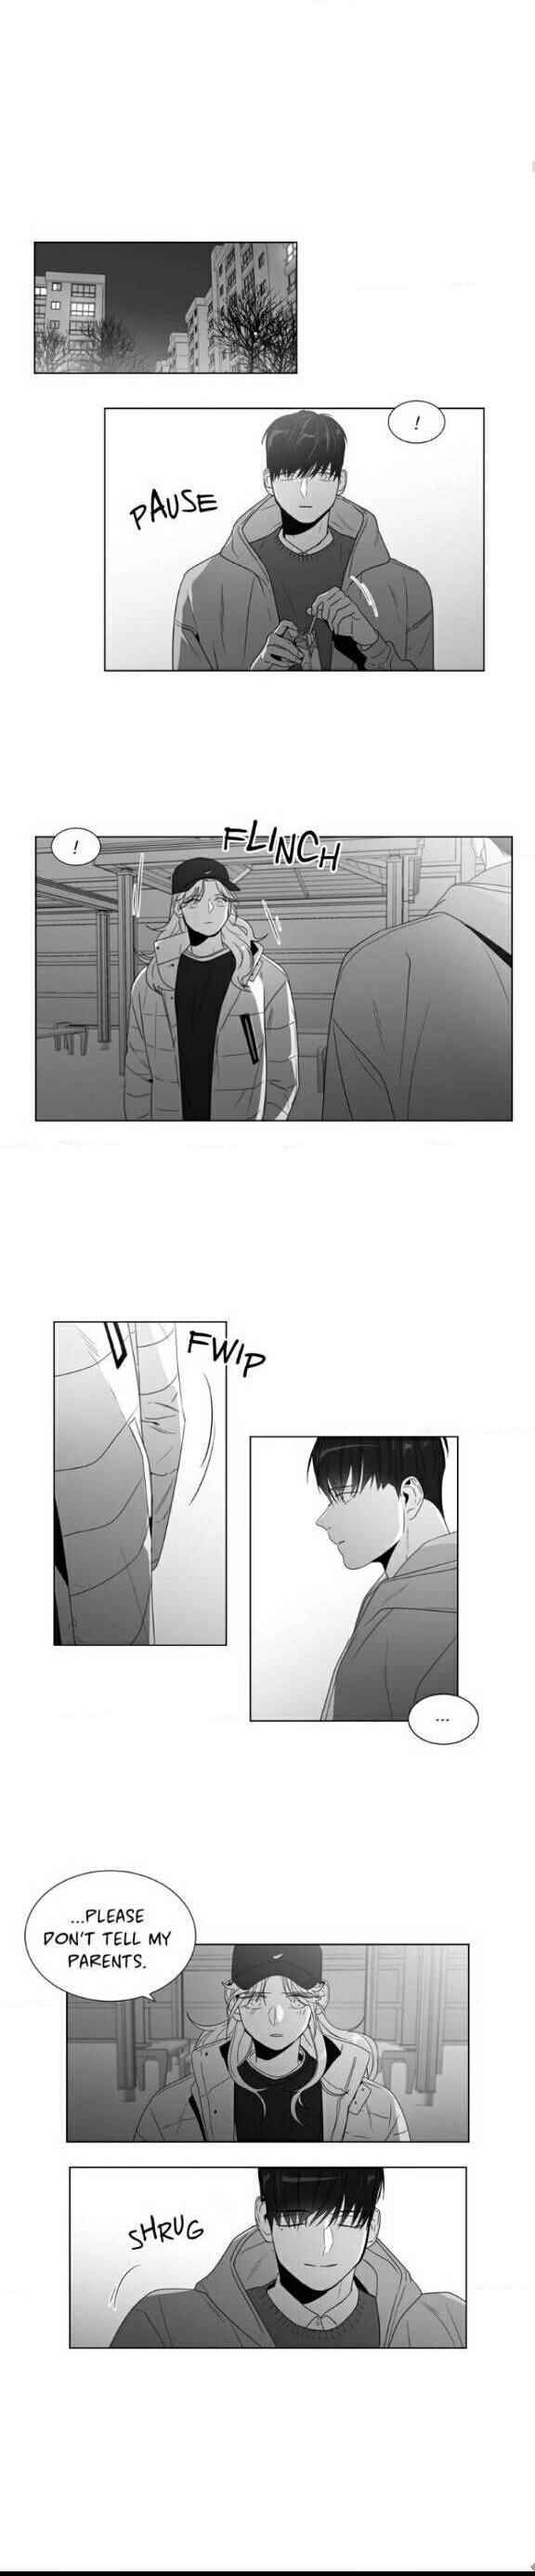 Lover Boy (Lezhin) Chapter 067 page 4